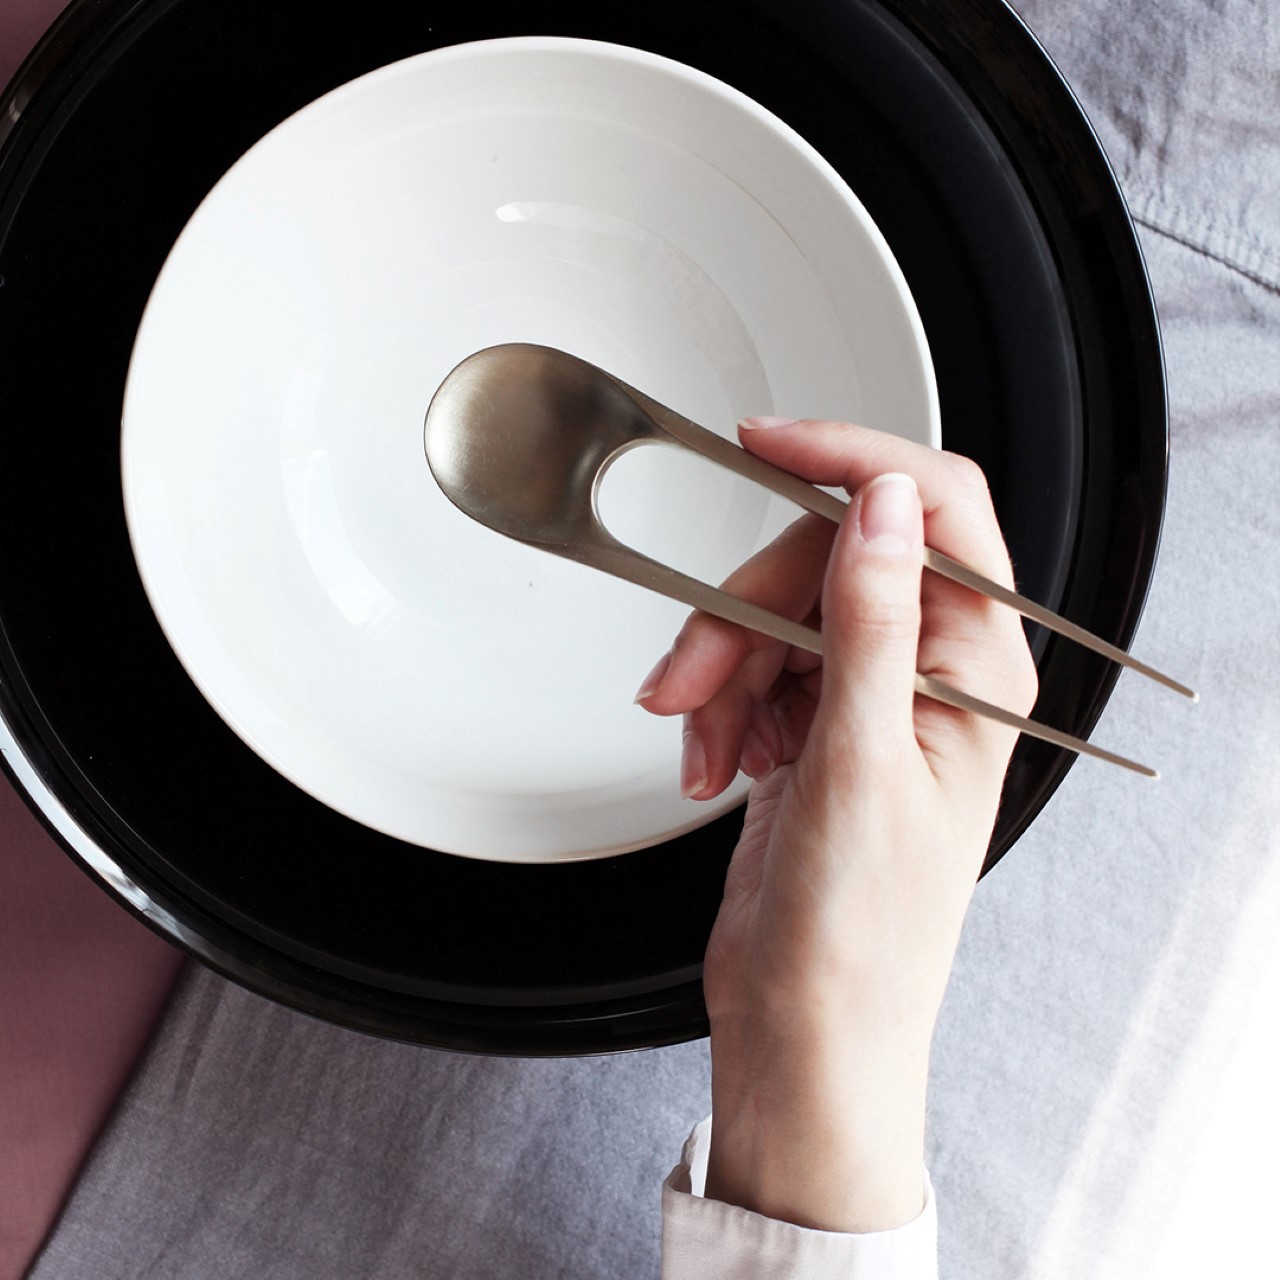 Fork, knife and spoon… Why should we rethink cutlery?